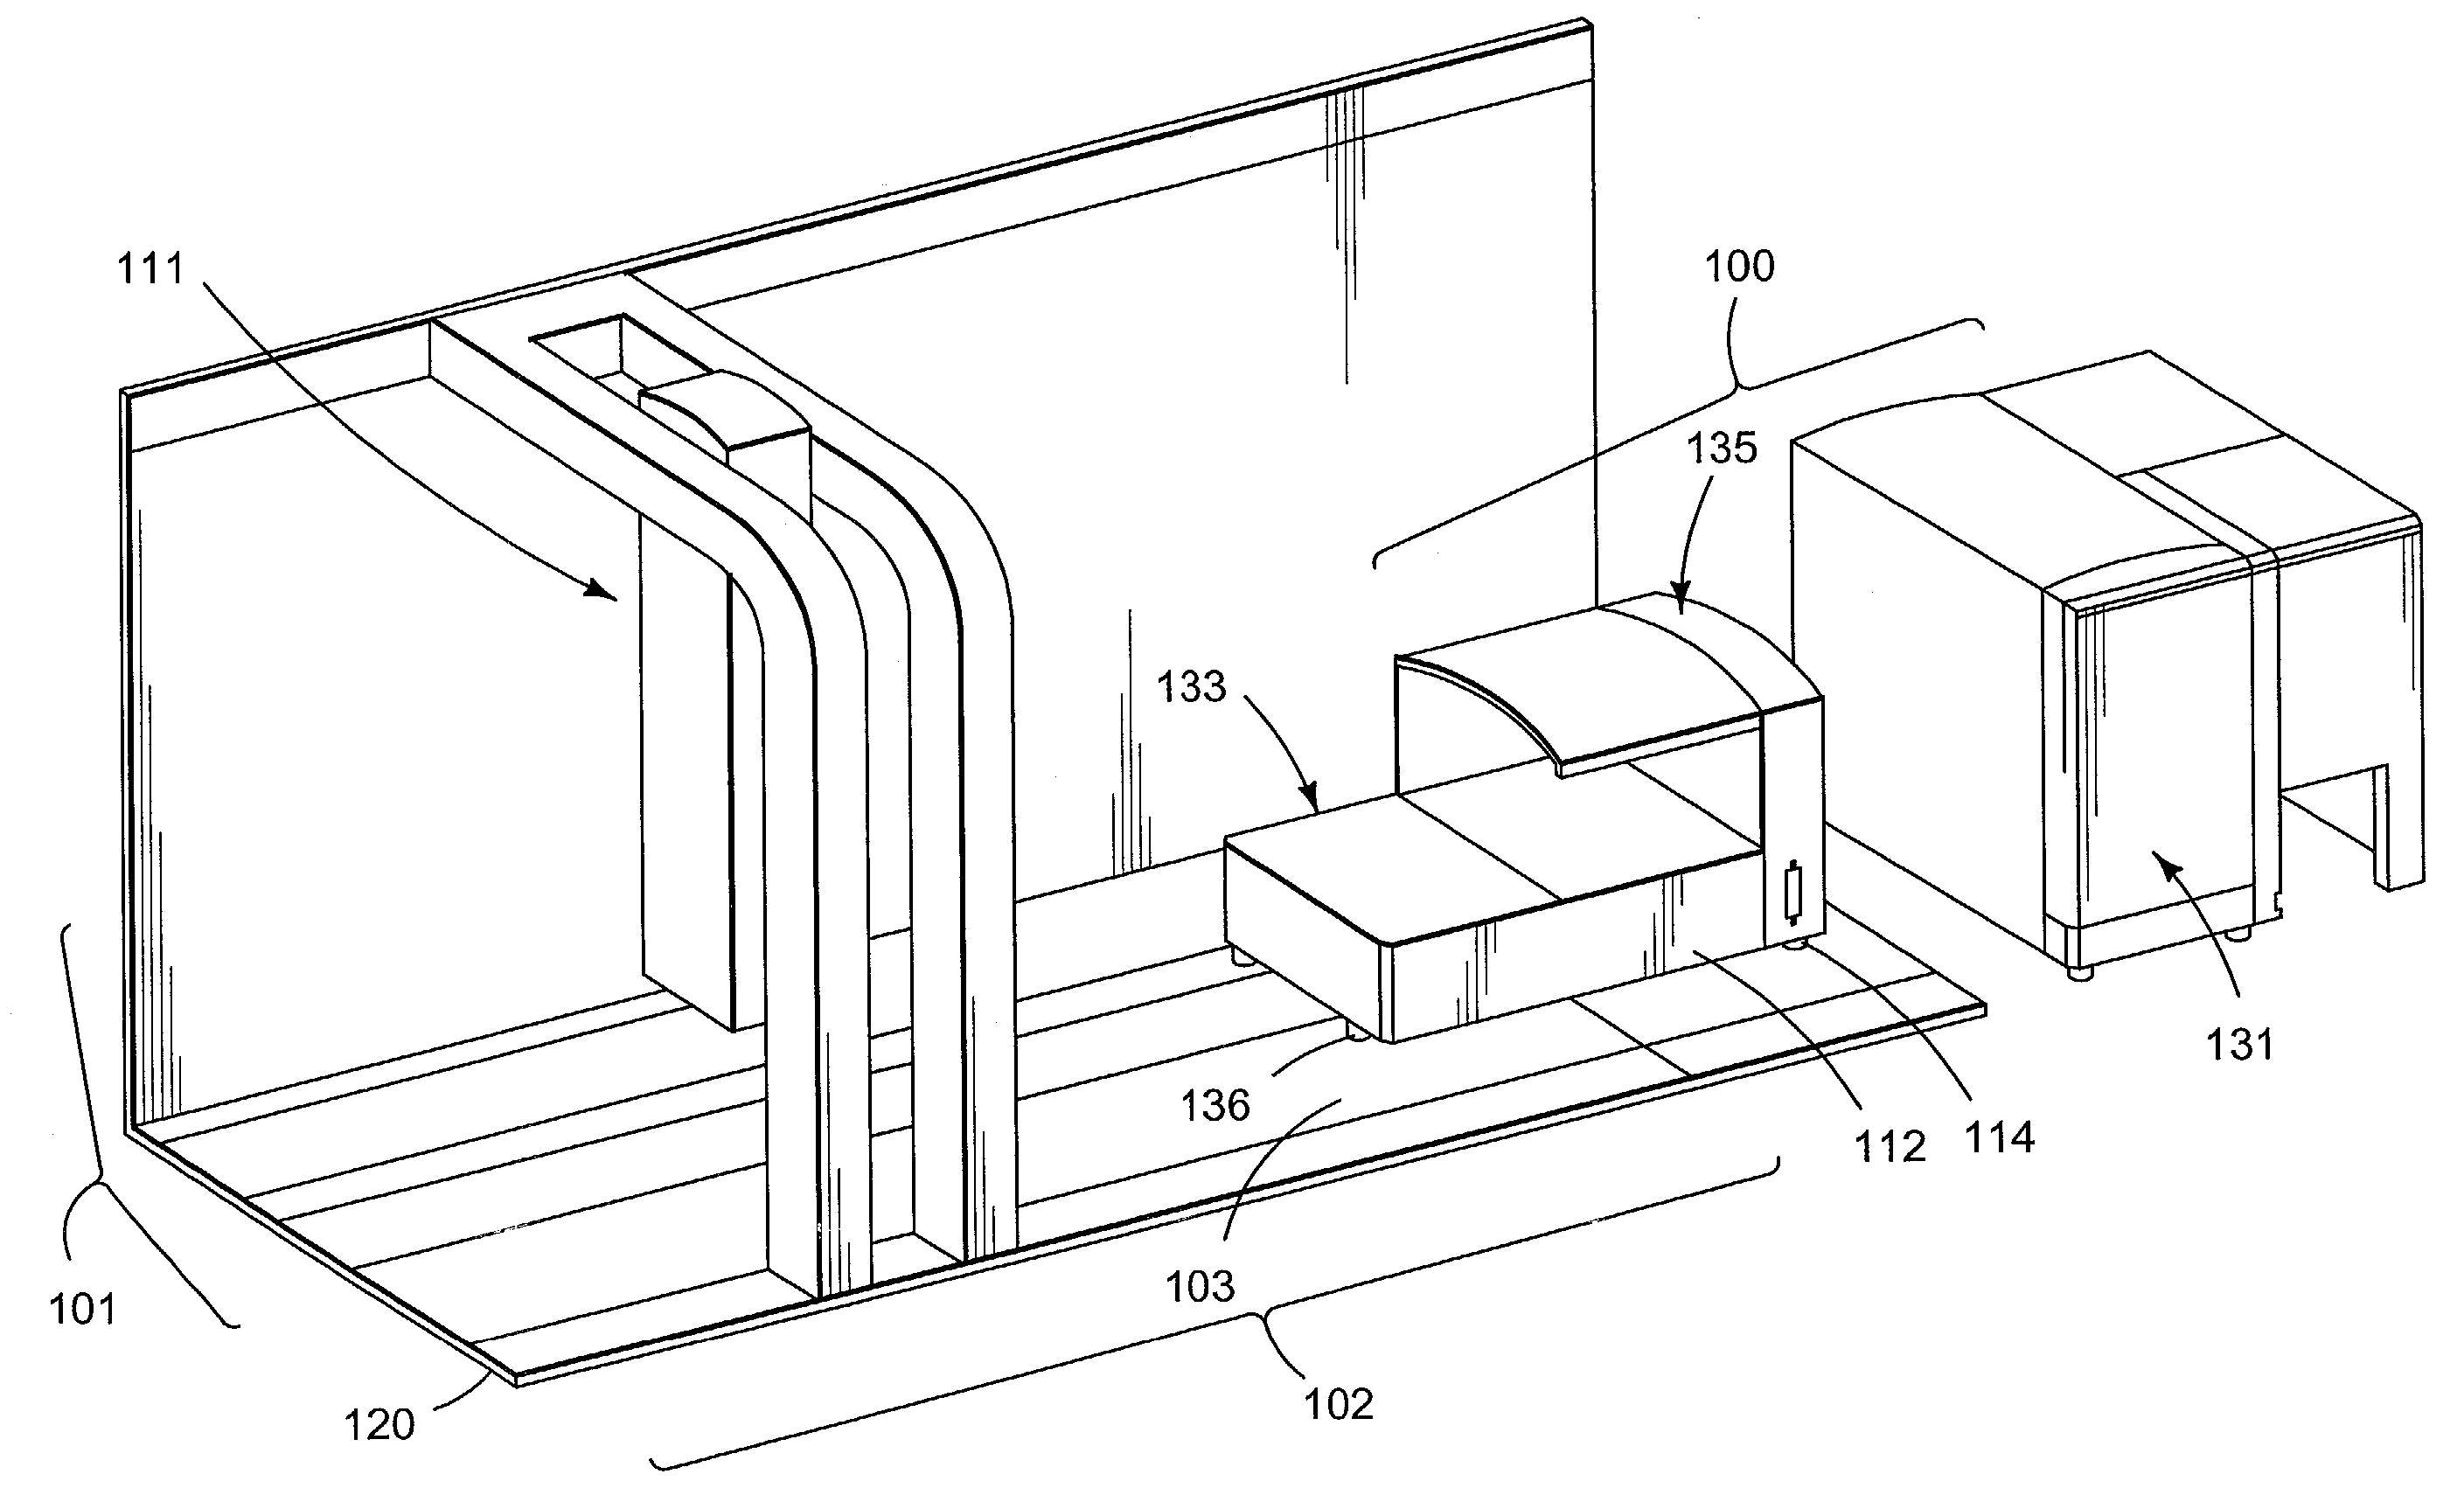 Universal non-contact dispense peripheral apparatus and method for a primary liquid handling device